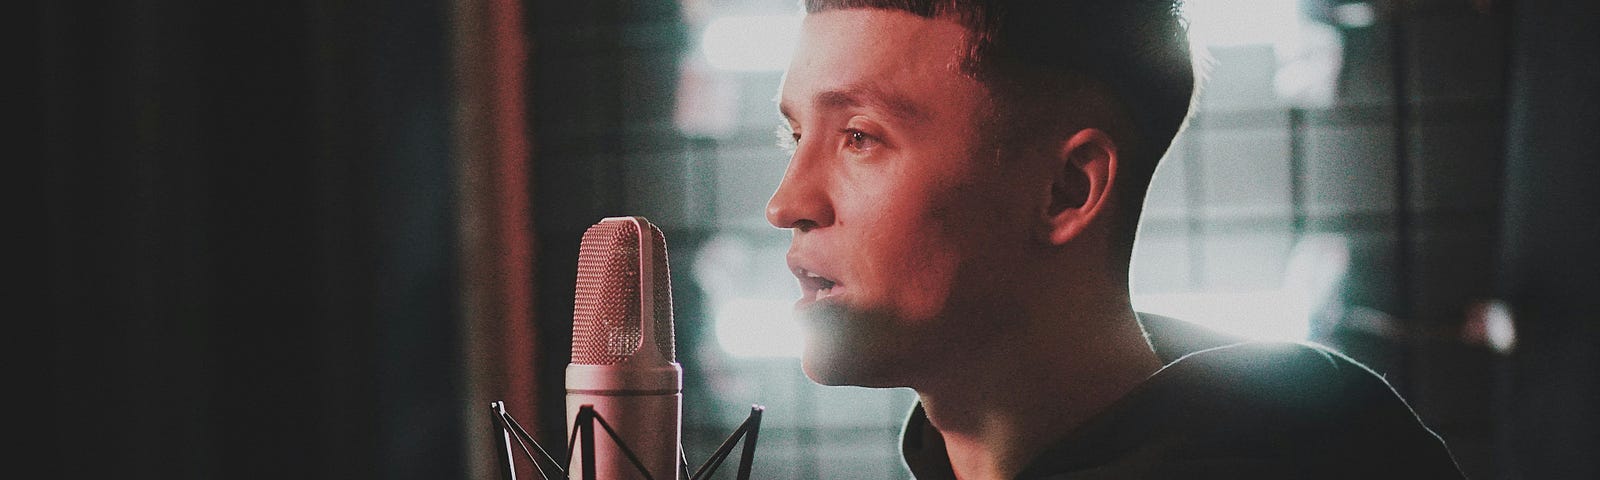 A person speaks or sings into a recording microphone in a dimly lit studio